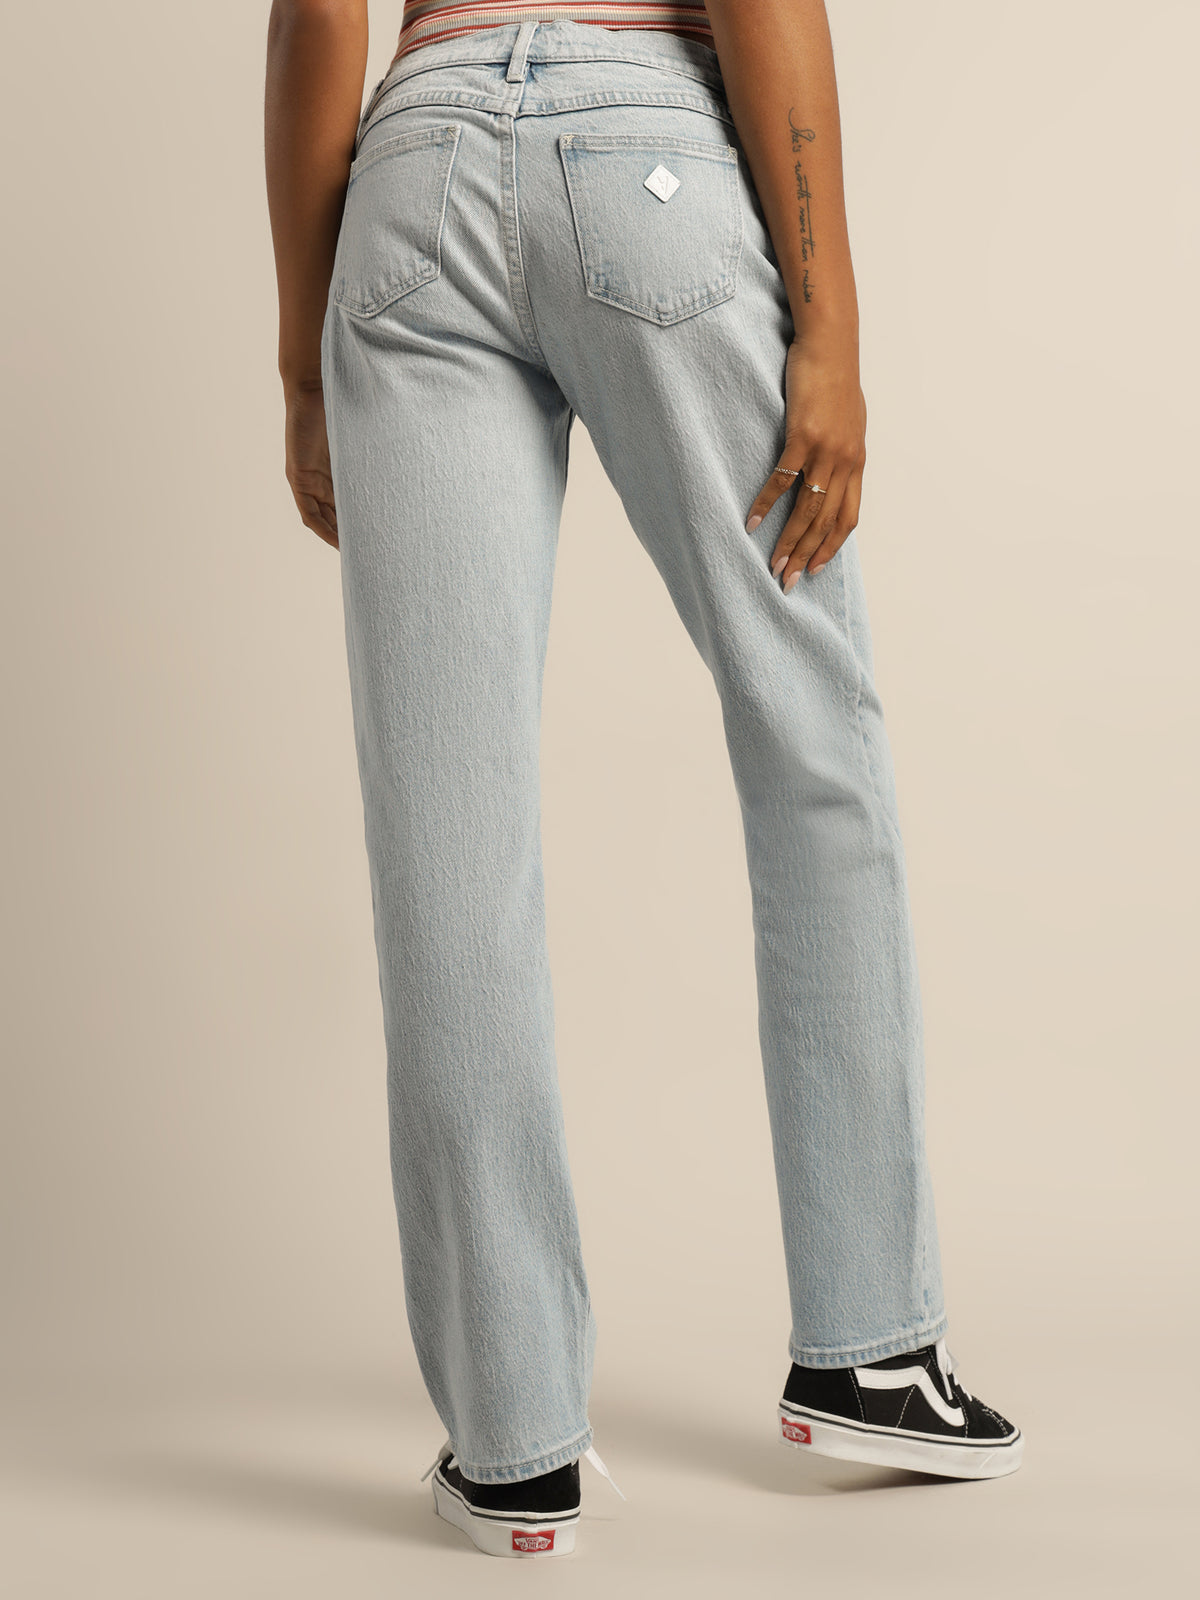 99 Low Straight Leg Jeans in Gina